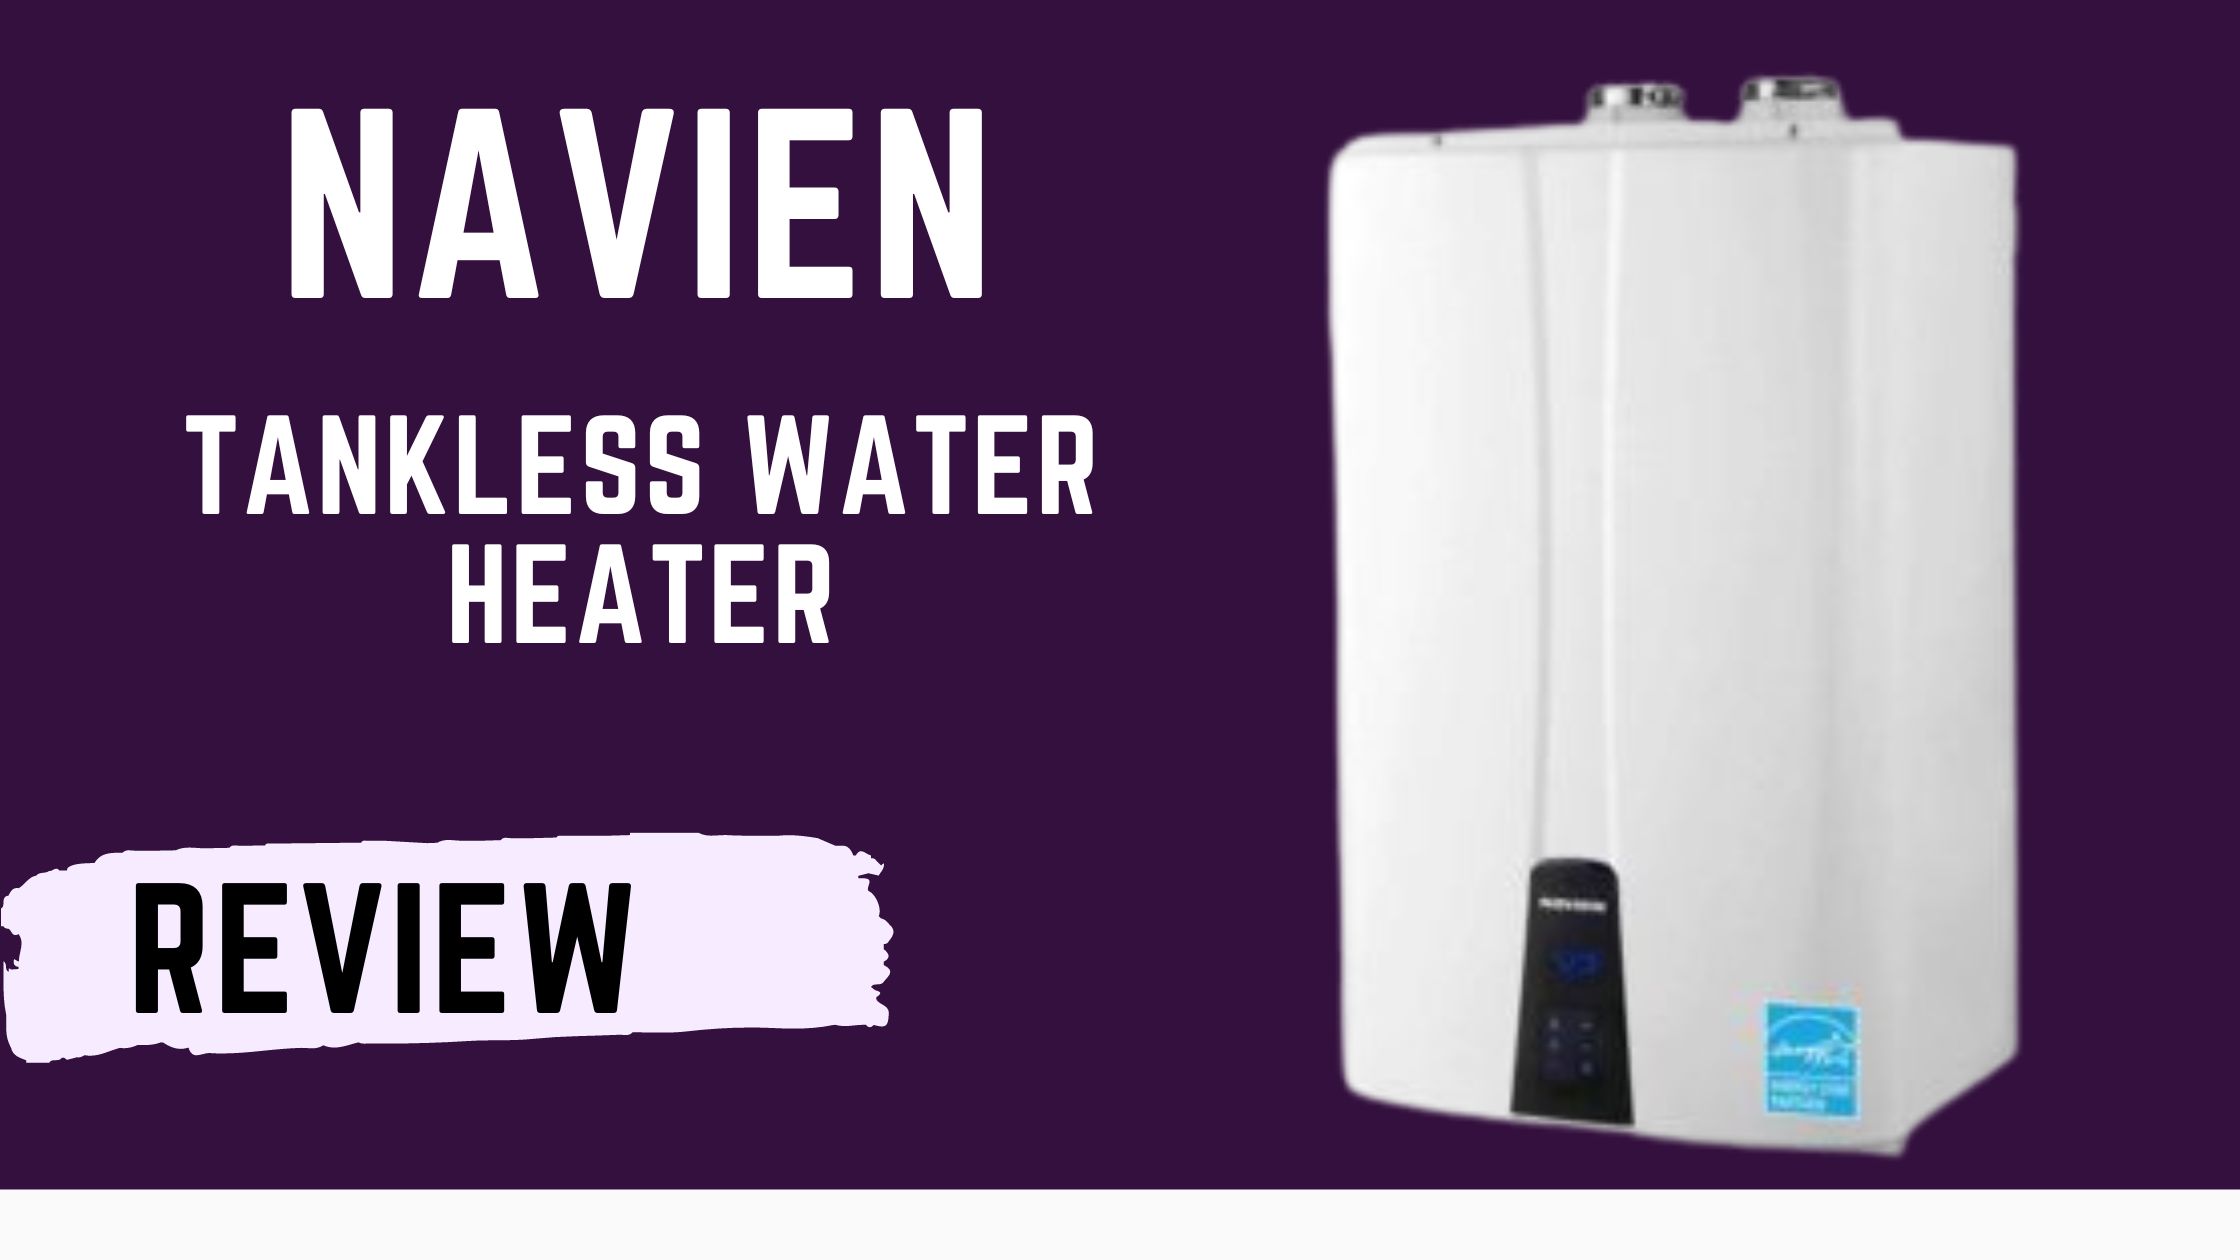 Navien tankleswater heater Review